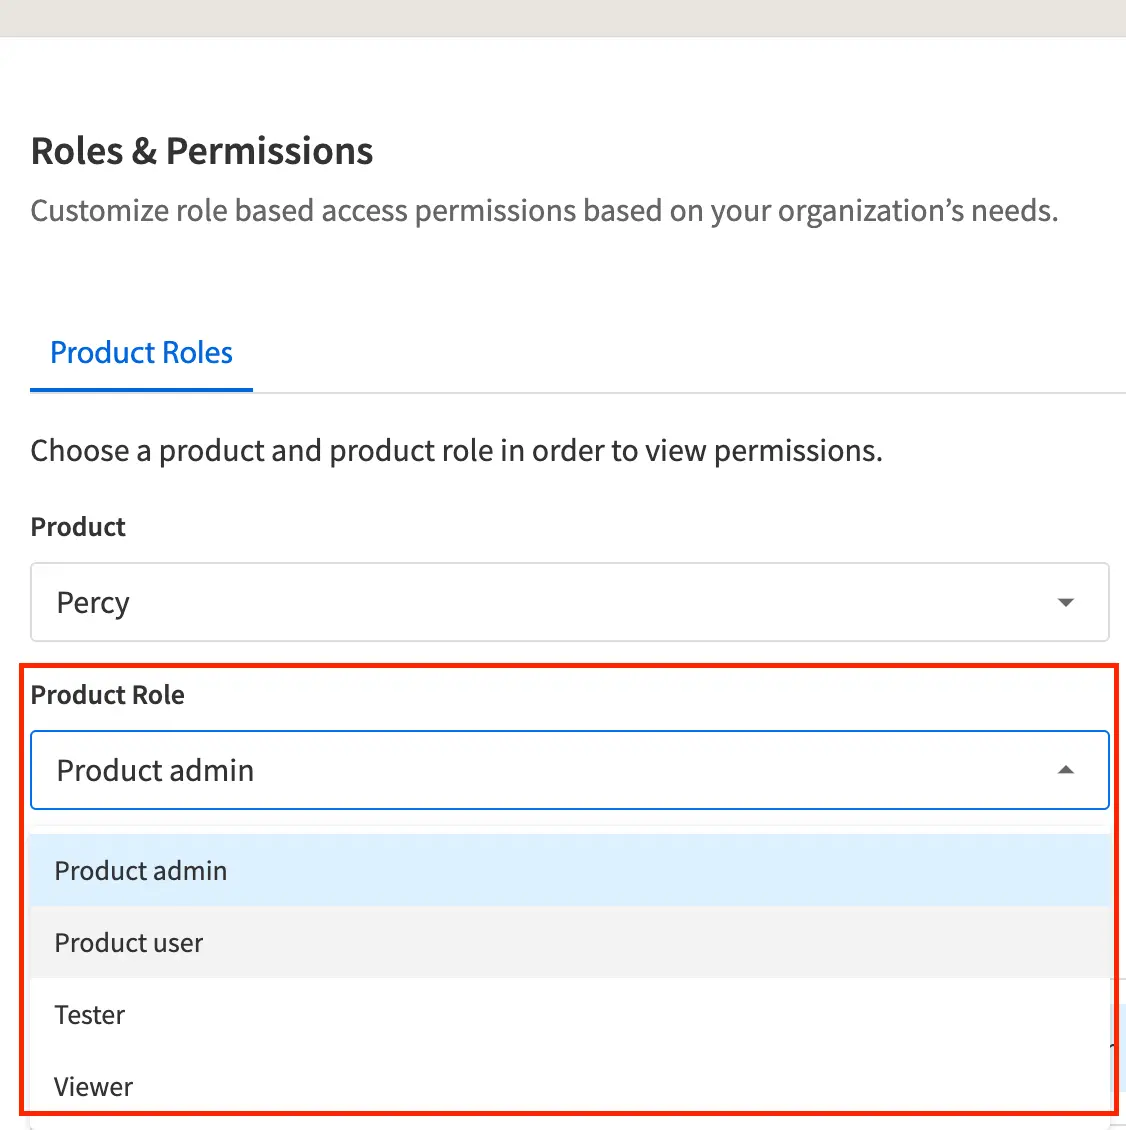 Select the product role you want to modify from the drop-down titled as Product Role